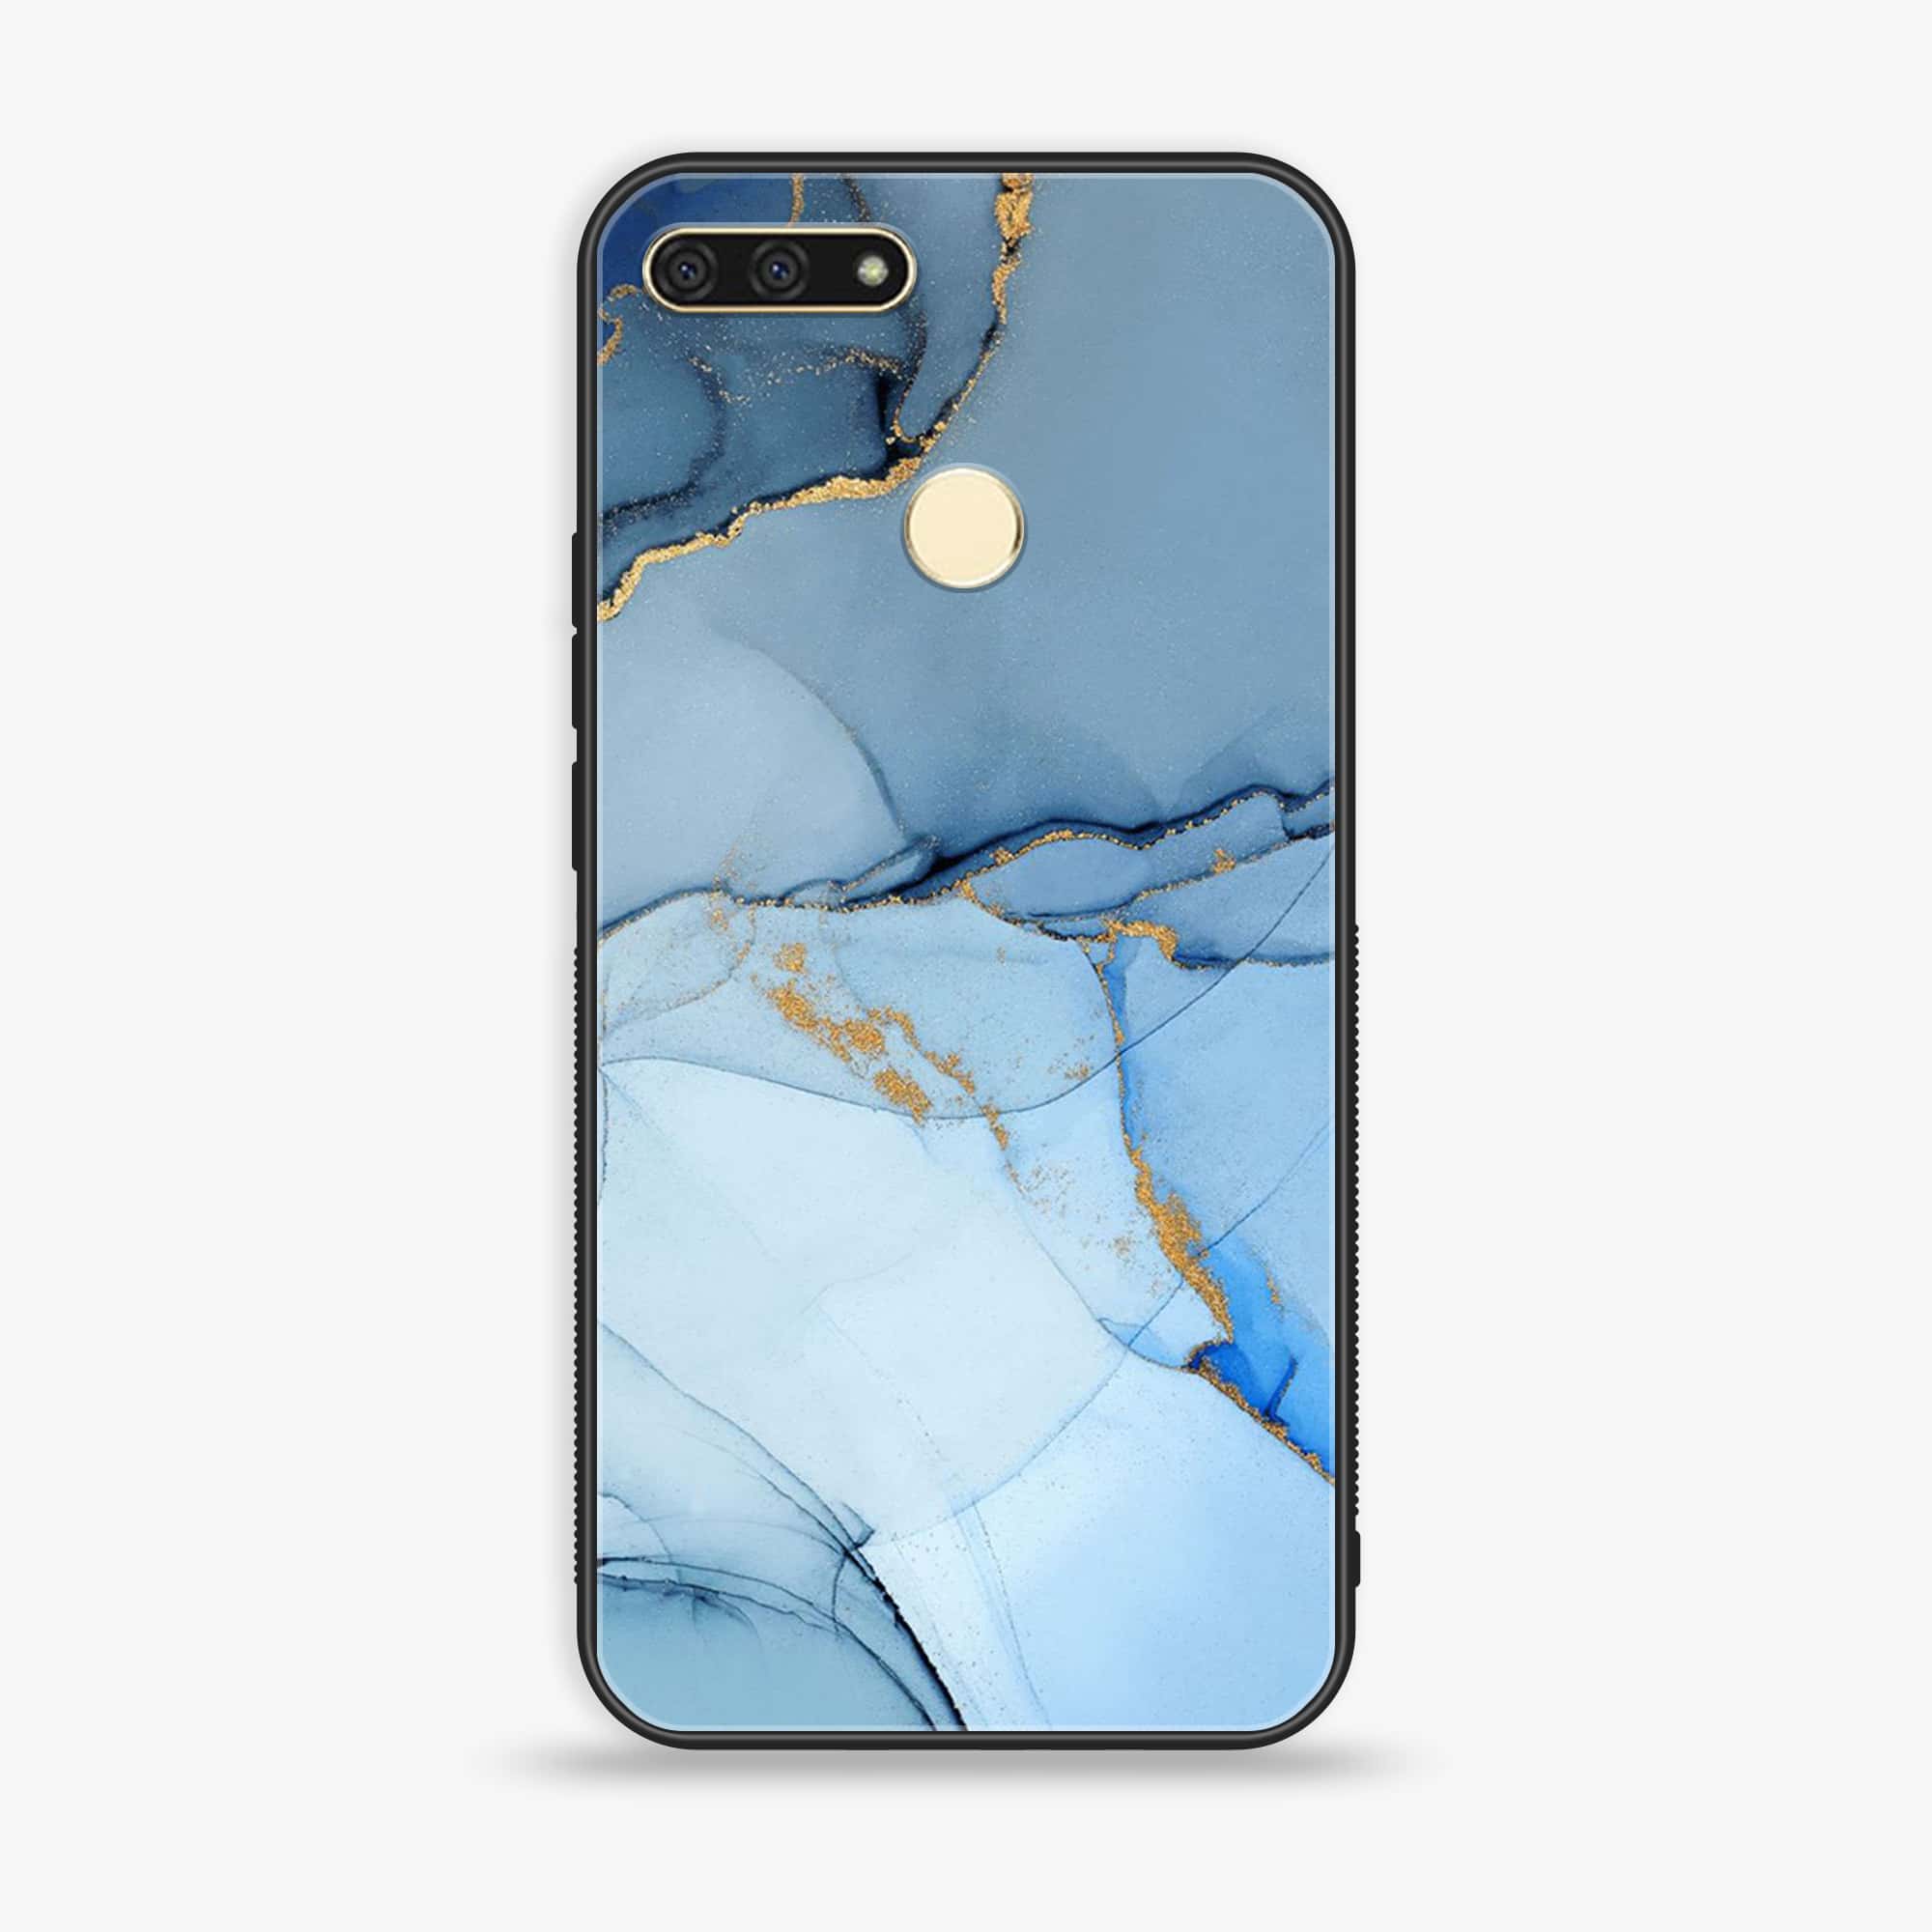 Huawei Y6 2018/Honor Play 7A - Blue Marble Series - Premium Printed Glass soft Bumper shock Proof Case